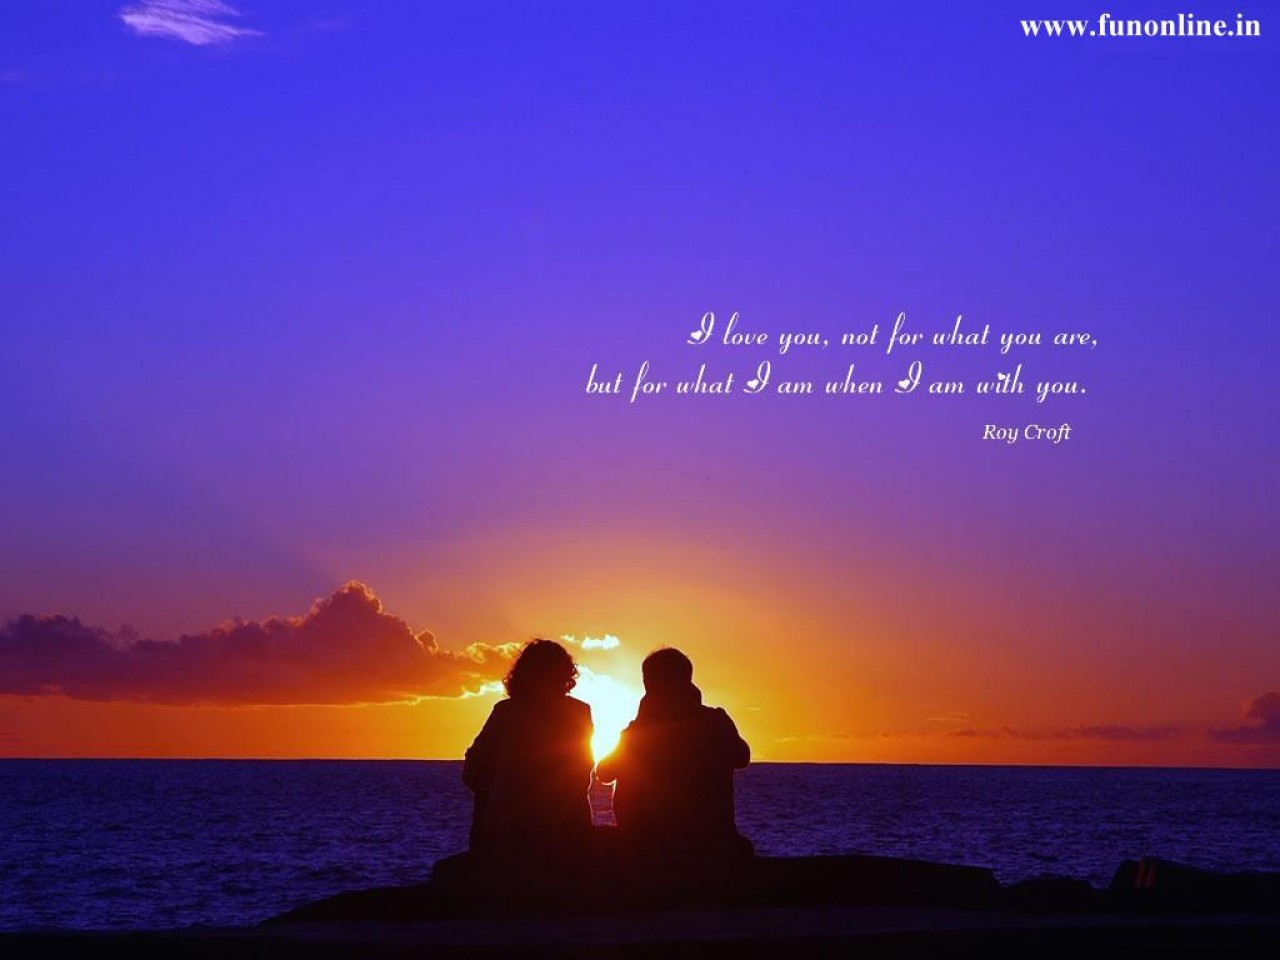  love quotes wallpapers true love quotes wallpapers I Love You